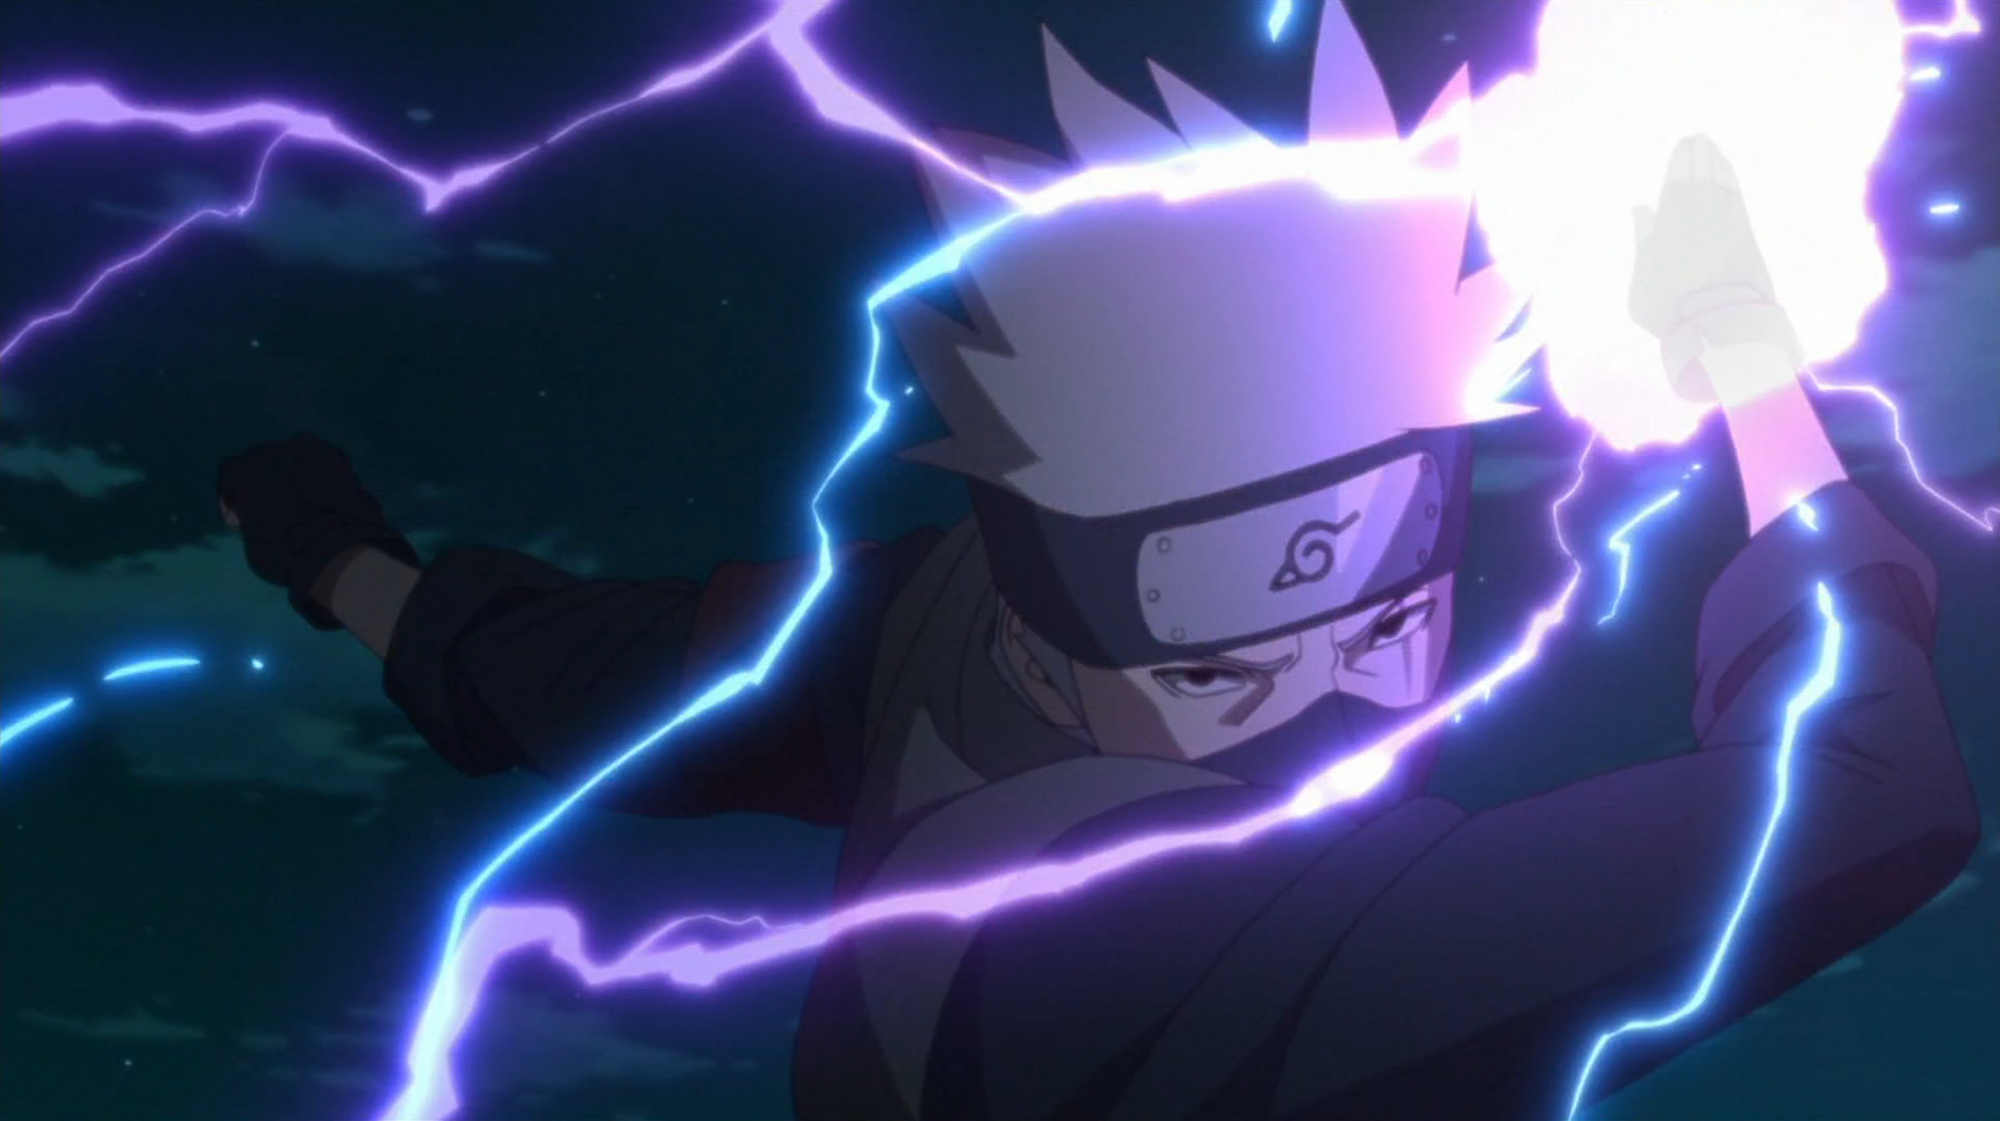 Lightning Release: Purple Electricity | Narutopedia | FANDOM powered by